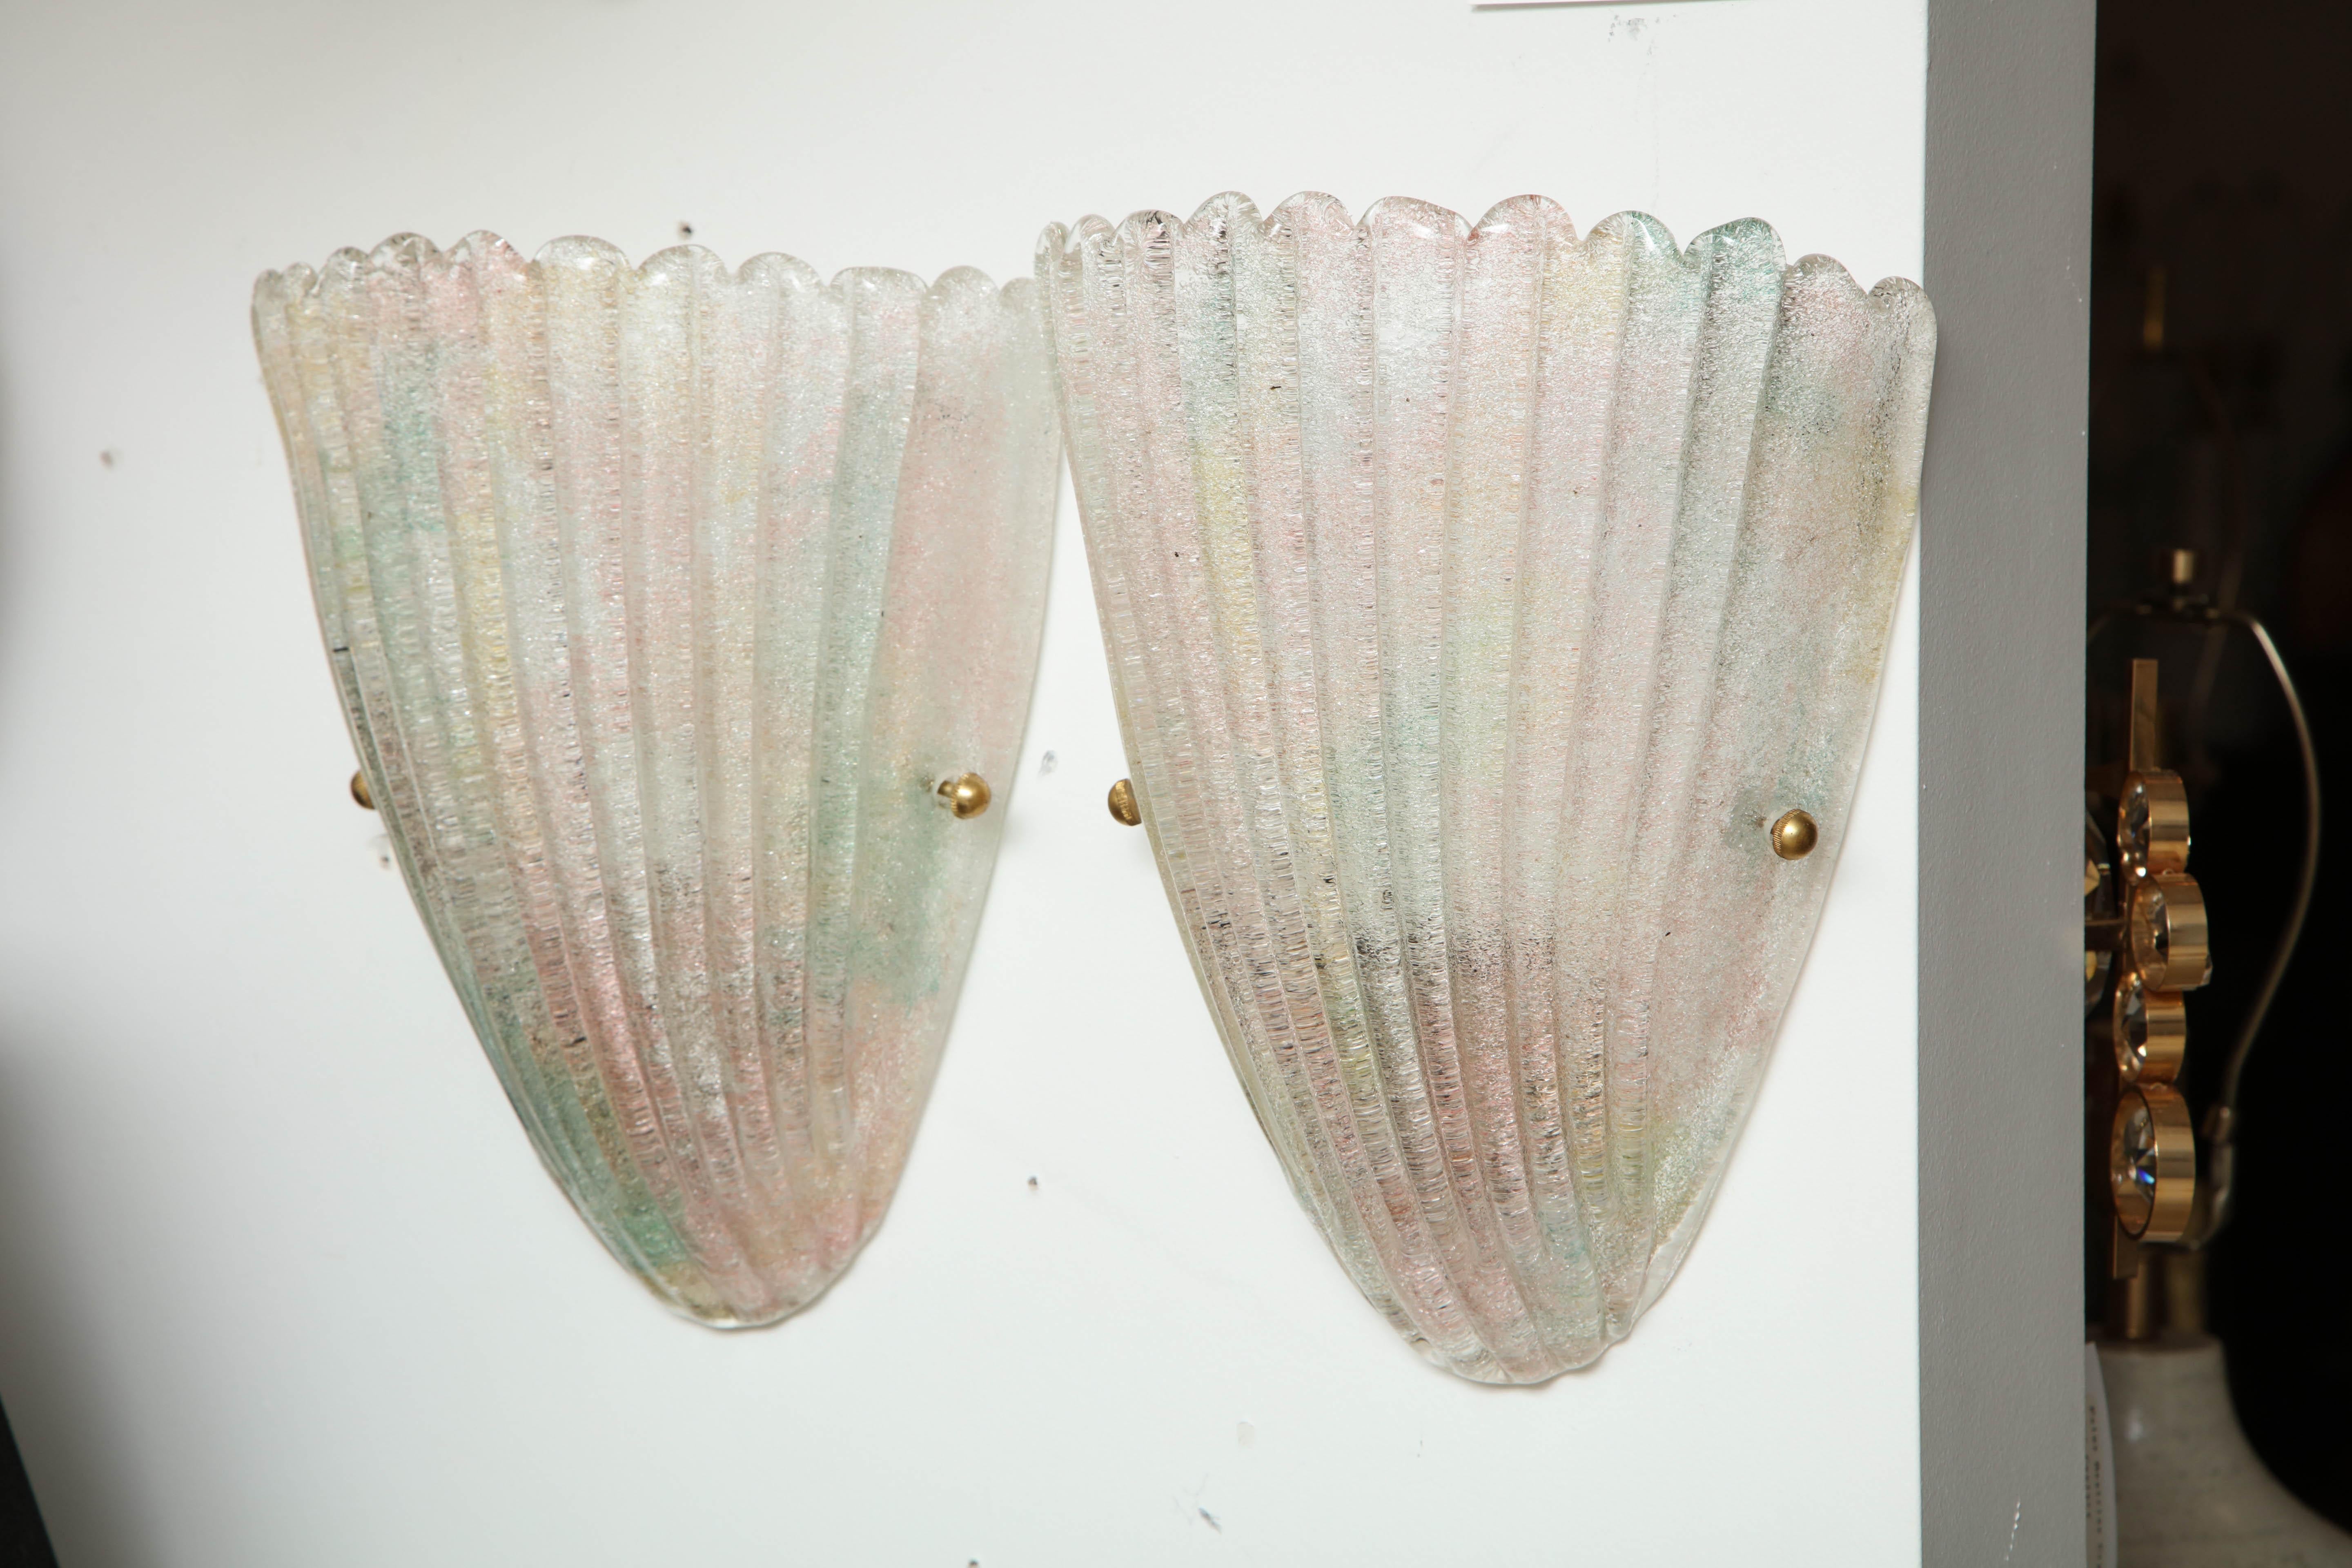 Murano glass stylized shell sconces with light undertones of blue, yellow, and pink glass, brass finials. Each sconce utilizes two candelabra type bulbs. Rewired for use in the USA.

Currently two pair are available, 2800 per pair.